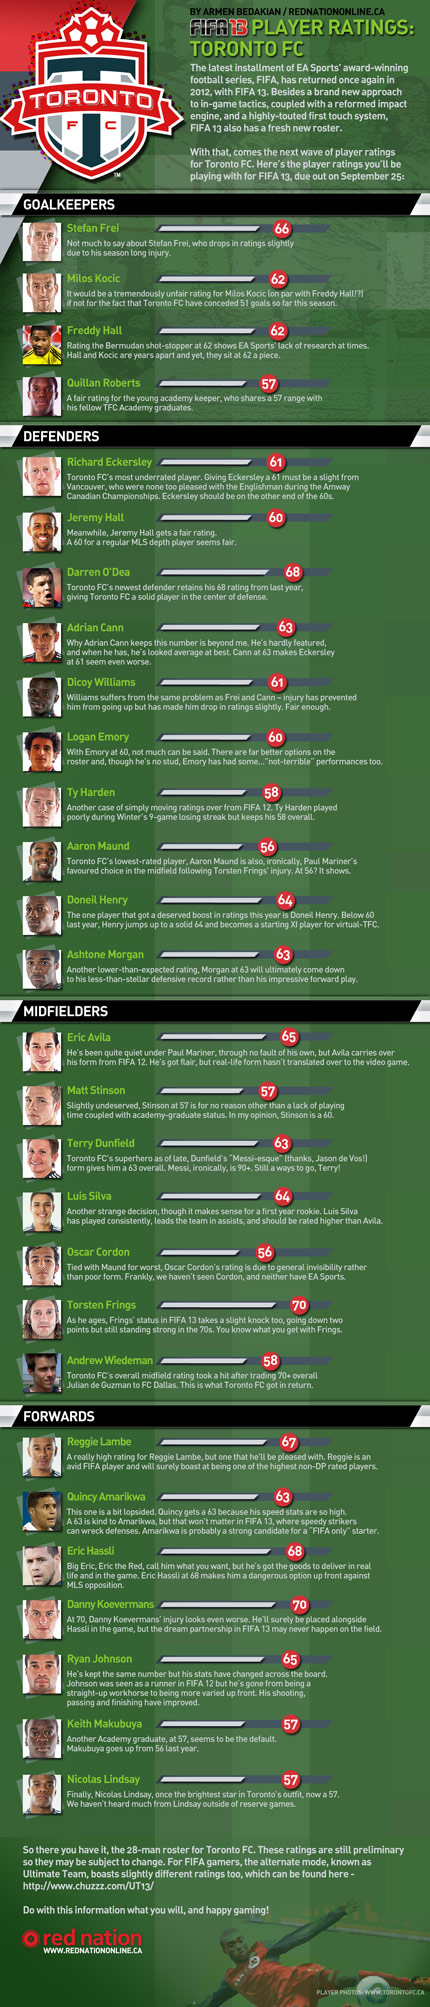 Infographic FIFA 13 Player